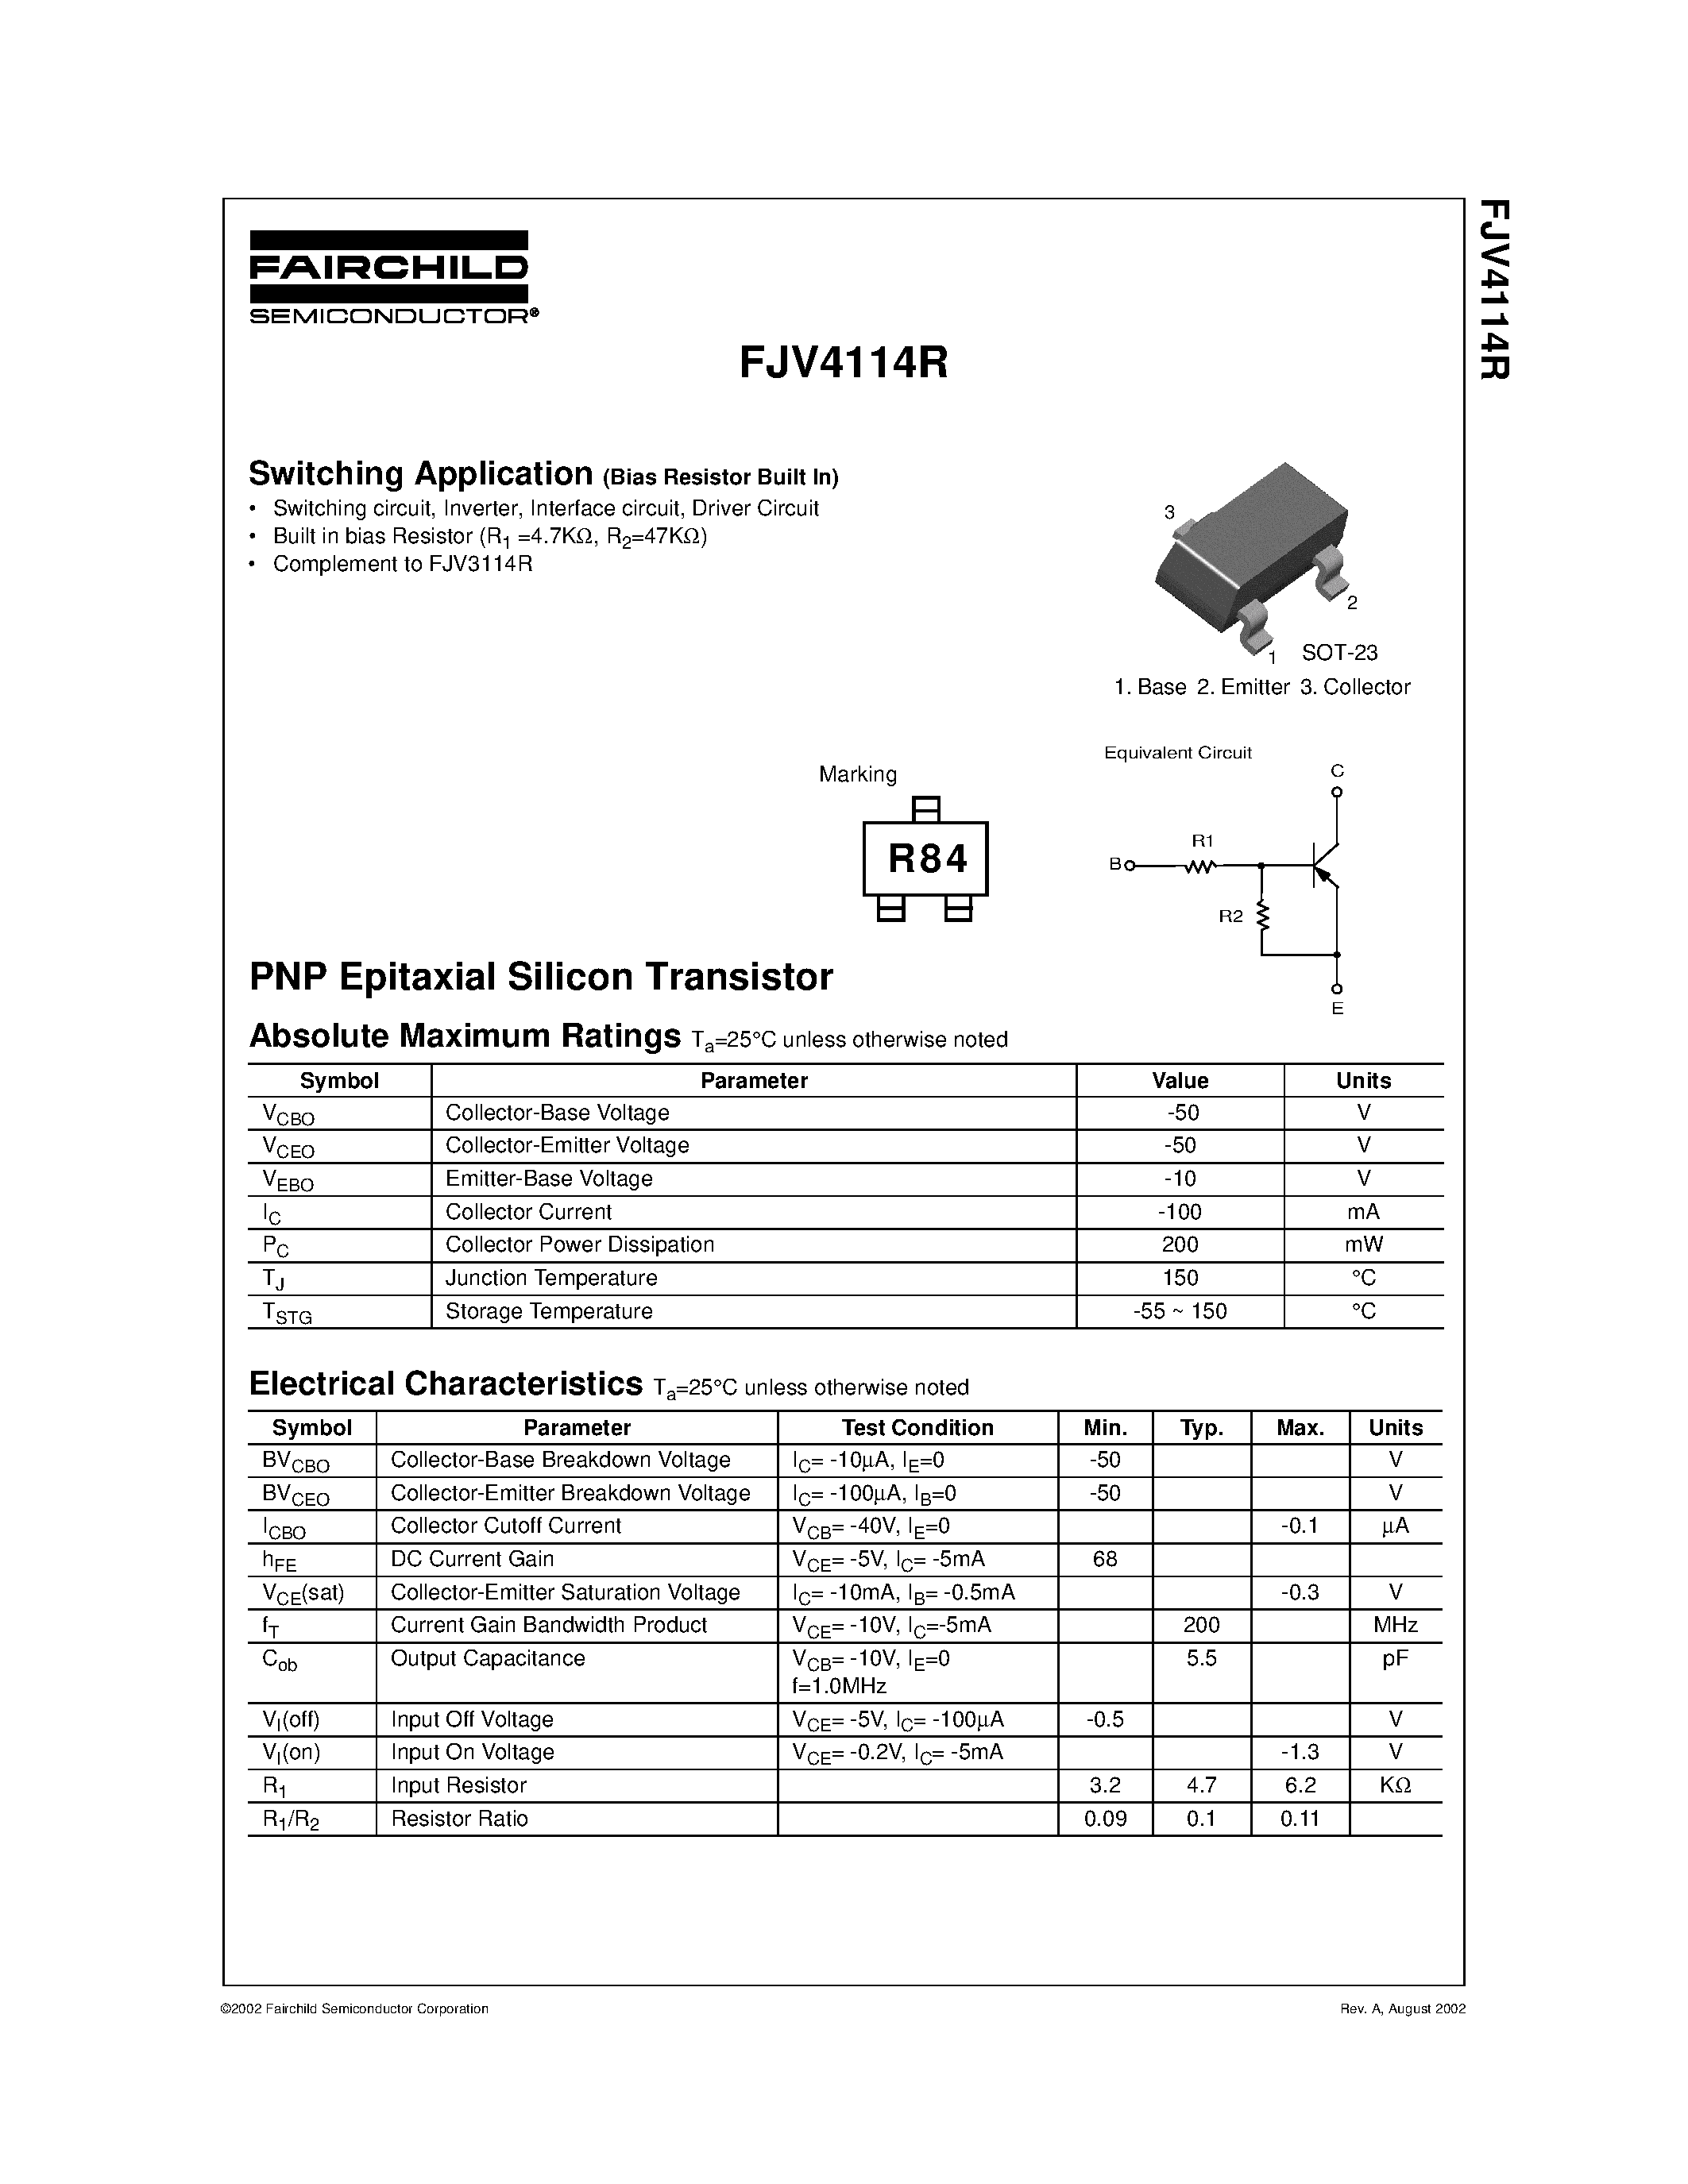 Datasheet FJV4114R - PNP Epitaxial Silicon Transistor page 1